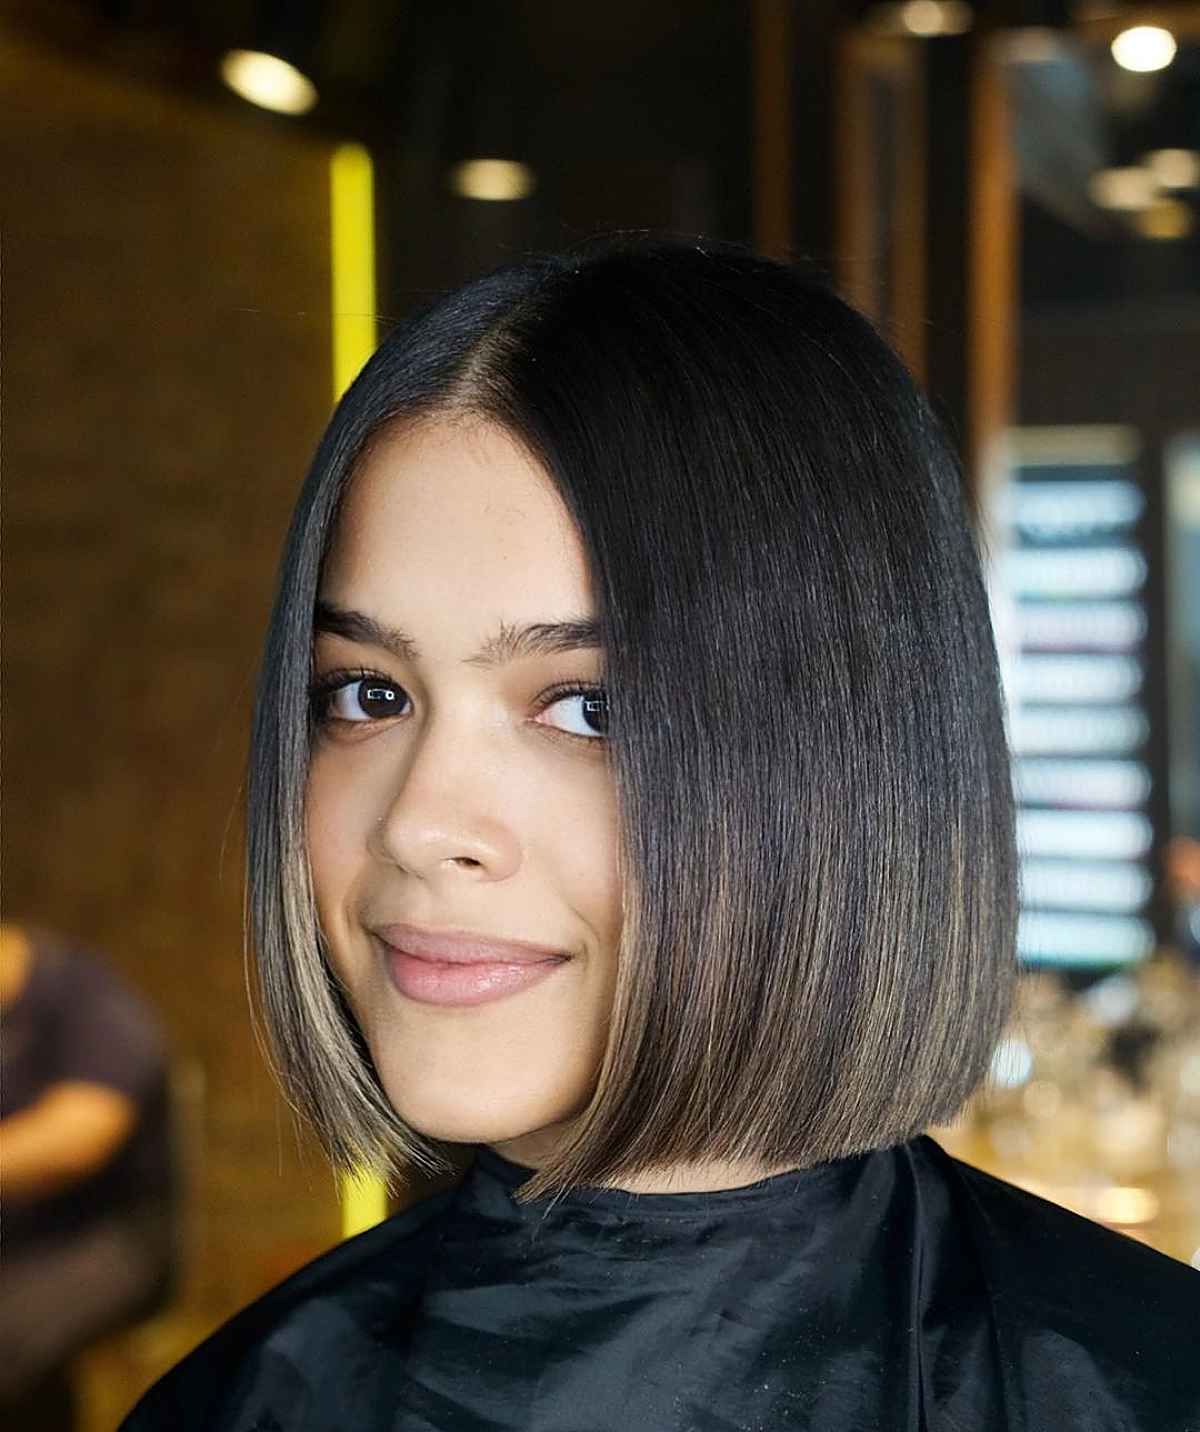 22 Best Short Straight Bob Haircuts For A Sleek Look Pertaining To Straight Bob Hairstyles (View 9 of 20)